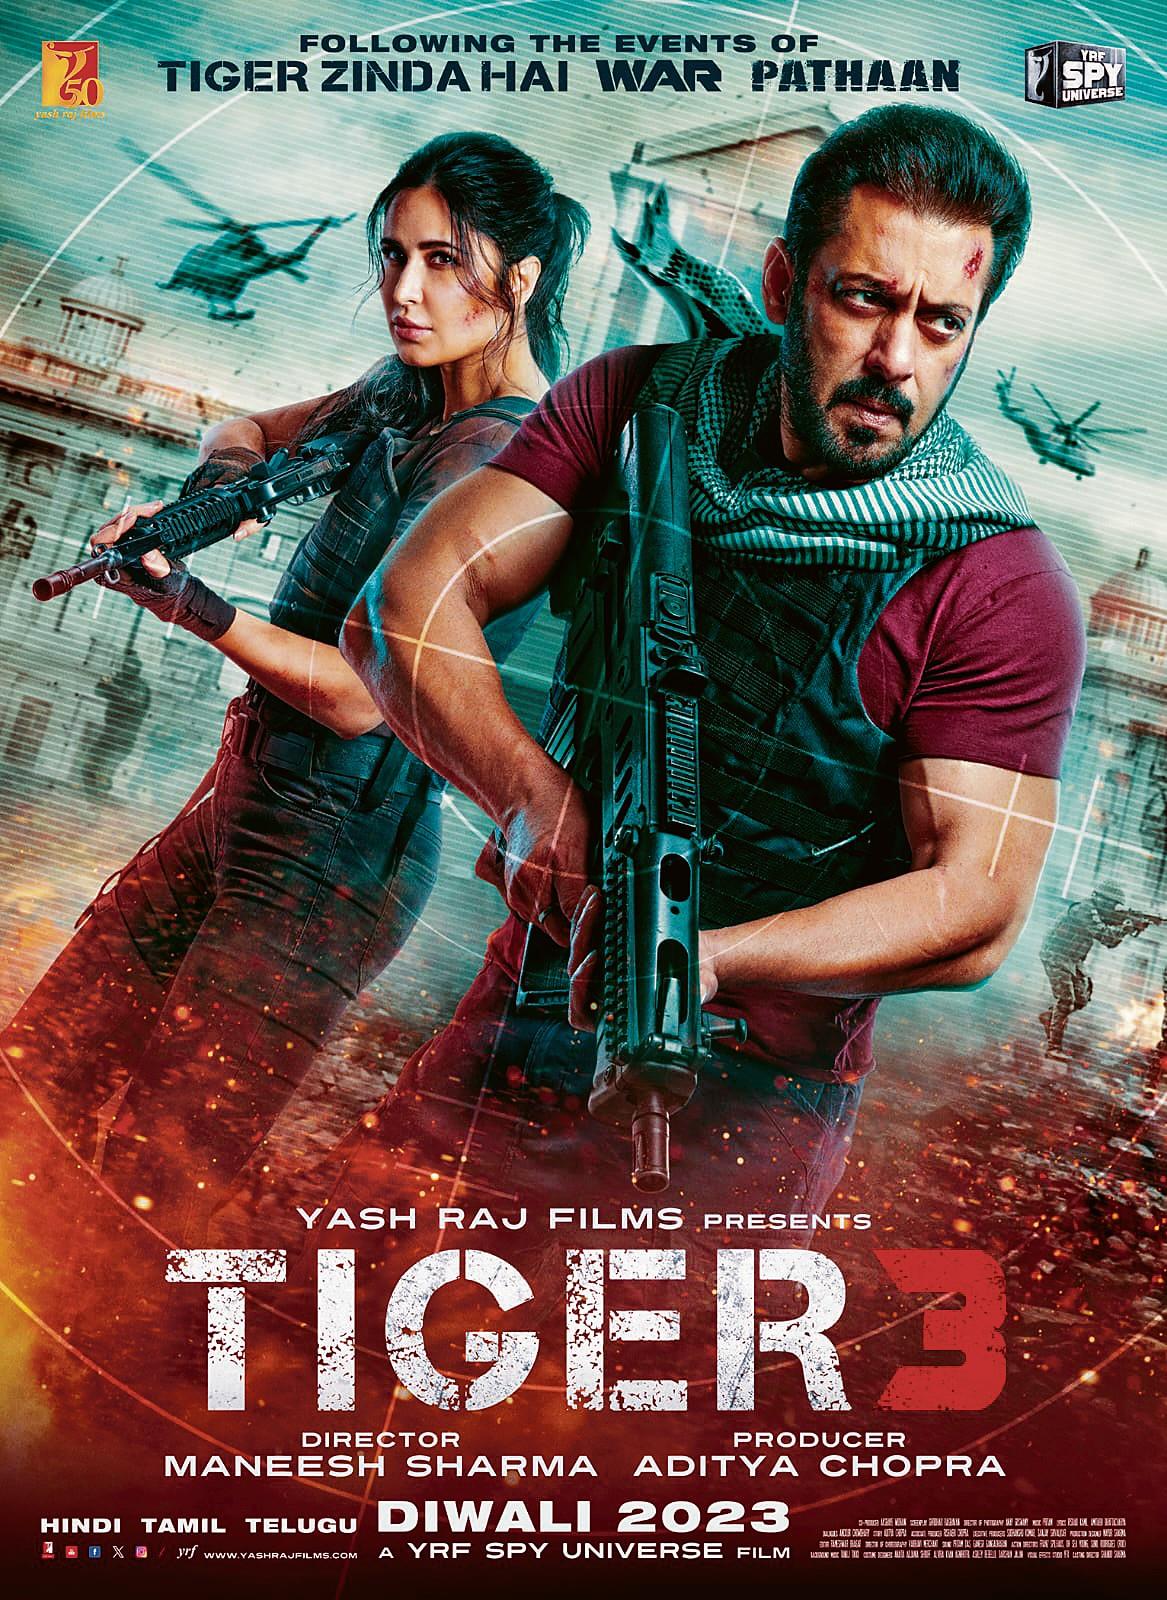 Tiger 3 poster out : The Tribune India